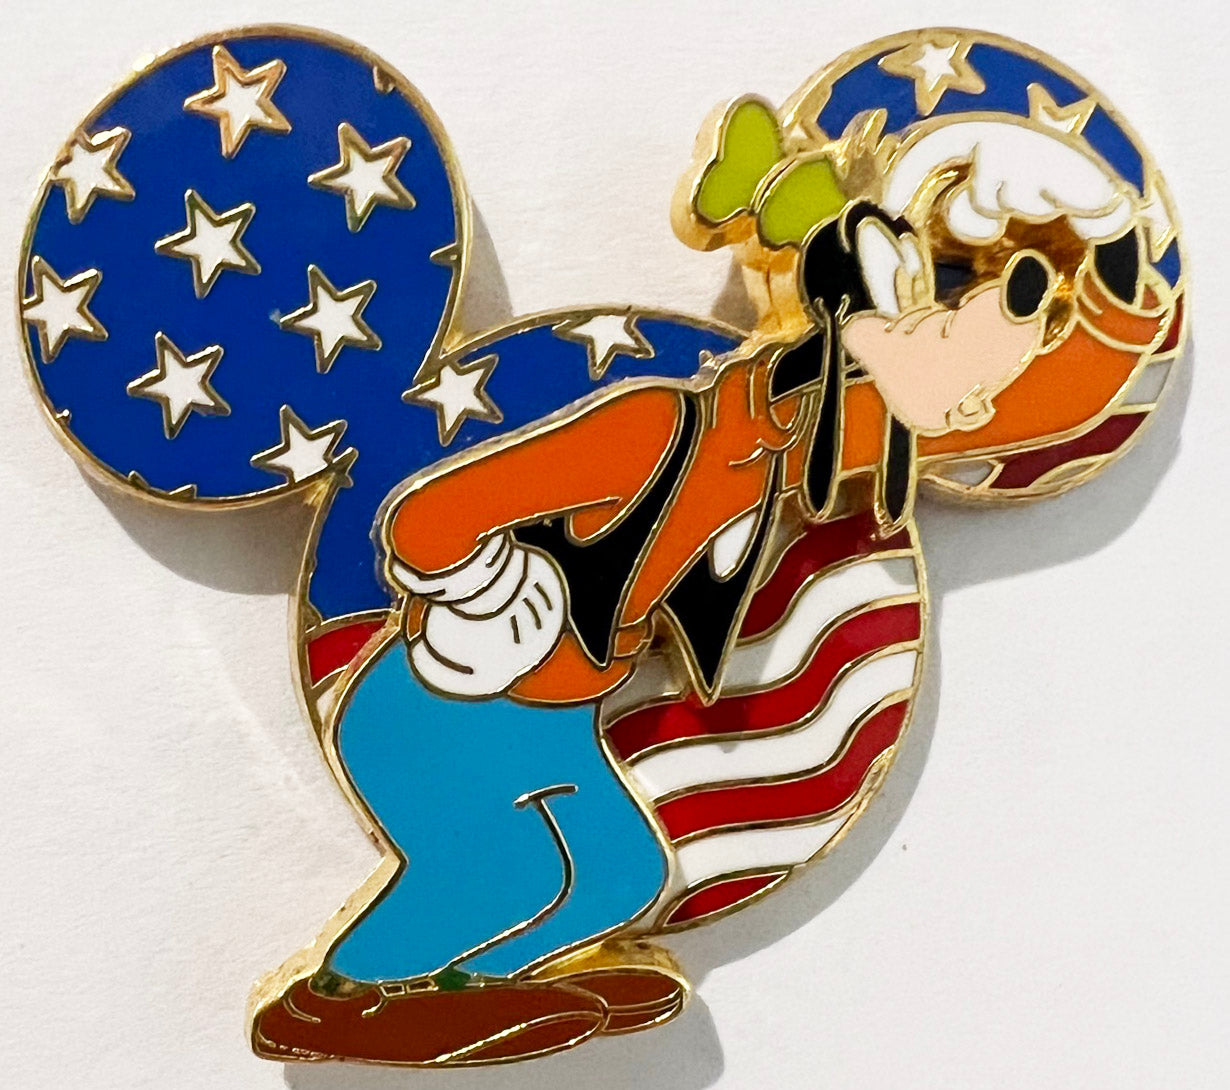 Where to Get the Best Pins for Disney Pin Trading at the Parks - Inside the  Magic